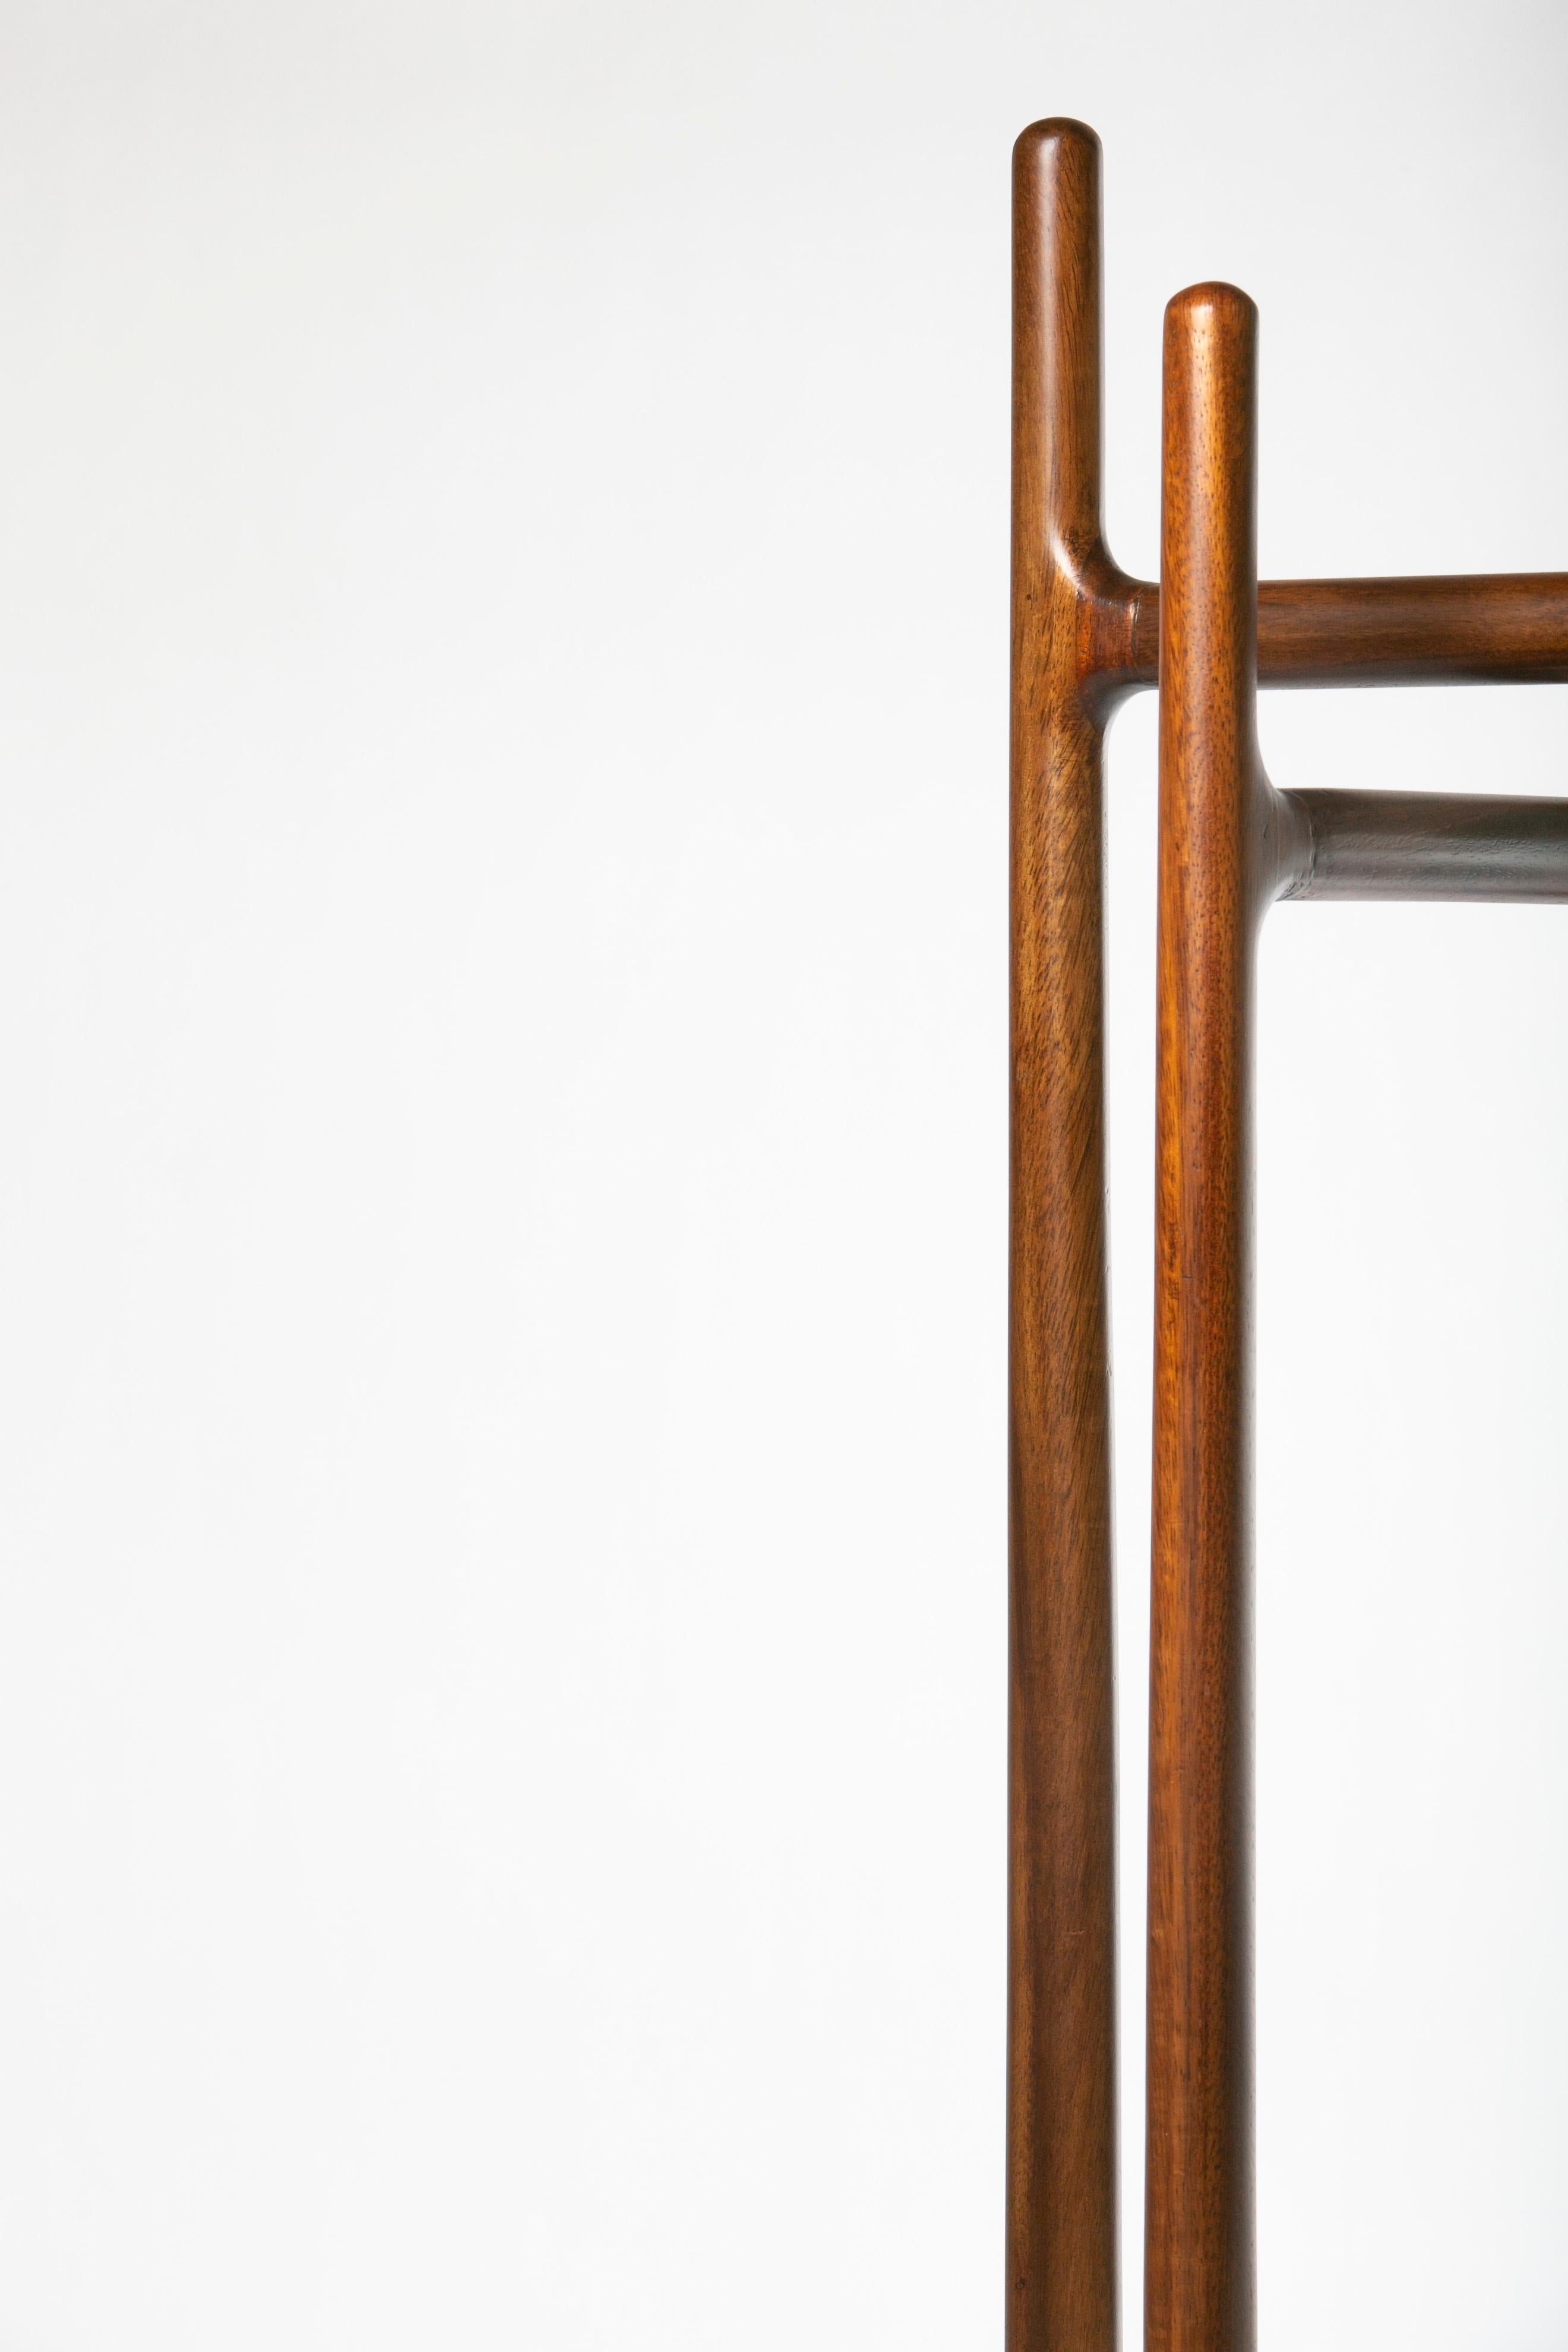 Desierto Coat rack, parota wood, Contemporary Mexican Design by Juskani Alonso In New Condition For Sale In Mexico City, MX